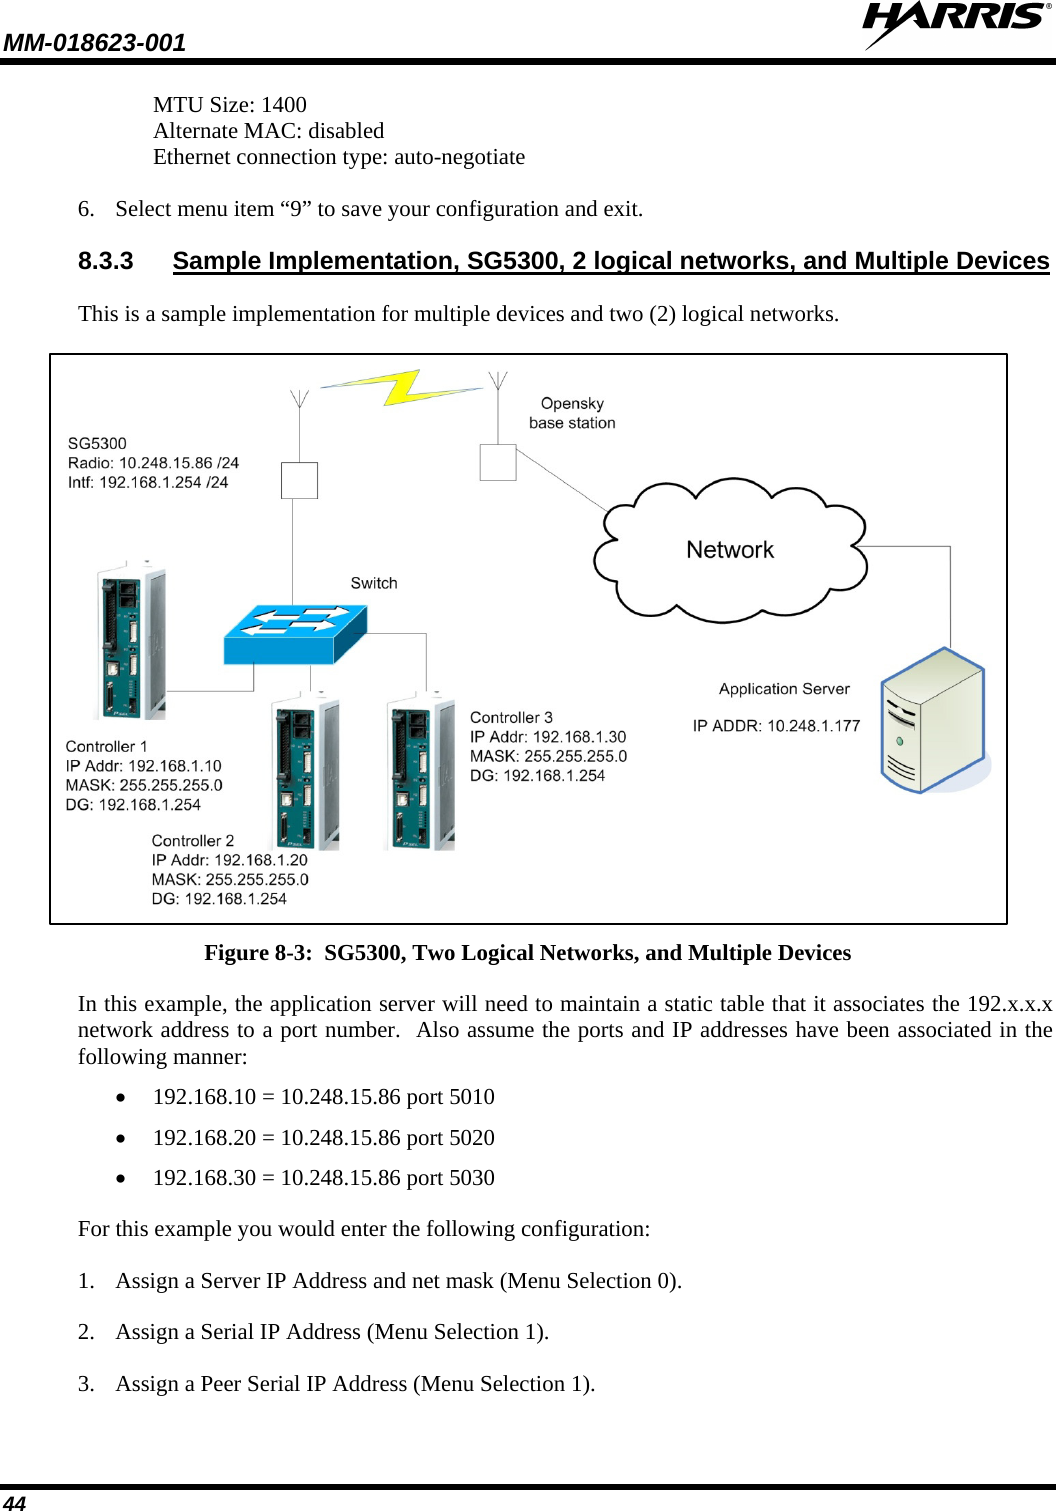 MM-018623-001   44 MTU Size: 1400 Alternate MAC: disabled Ethernet connection type: auto-negotiate 6. Select menu item “9” to save your configuration and exit. 8.3.3 Sample Implementation, SG5300, 2 logical networks, and Multiple Devices This is a sample implementation for multiple devices and two (2) logical networks.  Figure 8-3:  SG5300, Two Logical Networks, and Multiple Devices In this example, the application server will need to maintain a static table that it associates the 192.x.x.x network address to a port number.  Also assume the ports and IP addresses have been associated in the following manner: • 192.168.10 = 10.248.15.86 port 5010 • 192.168.20 = 10.248.15.86 port 5020 • 192.168.30 = 10.248.15.86 port 5030  For this example you would enter the following configuration: 1. Assign a Server IP Address and net mask (Menu Selection 0). 2. Assign a Serial IP Address (Menu Selection 1). 3. Assign a Peer Serial IP Address (Menu Selection 1). 